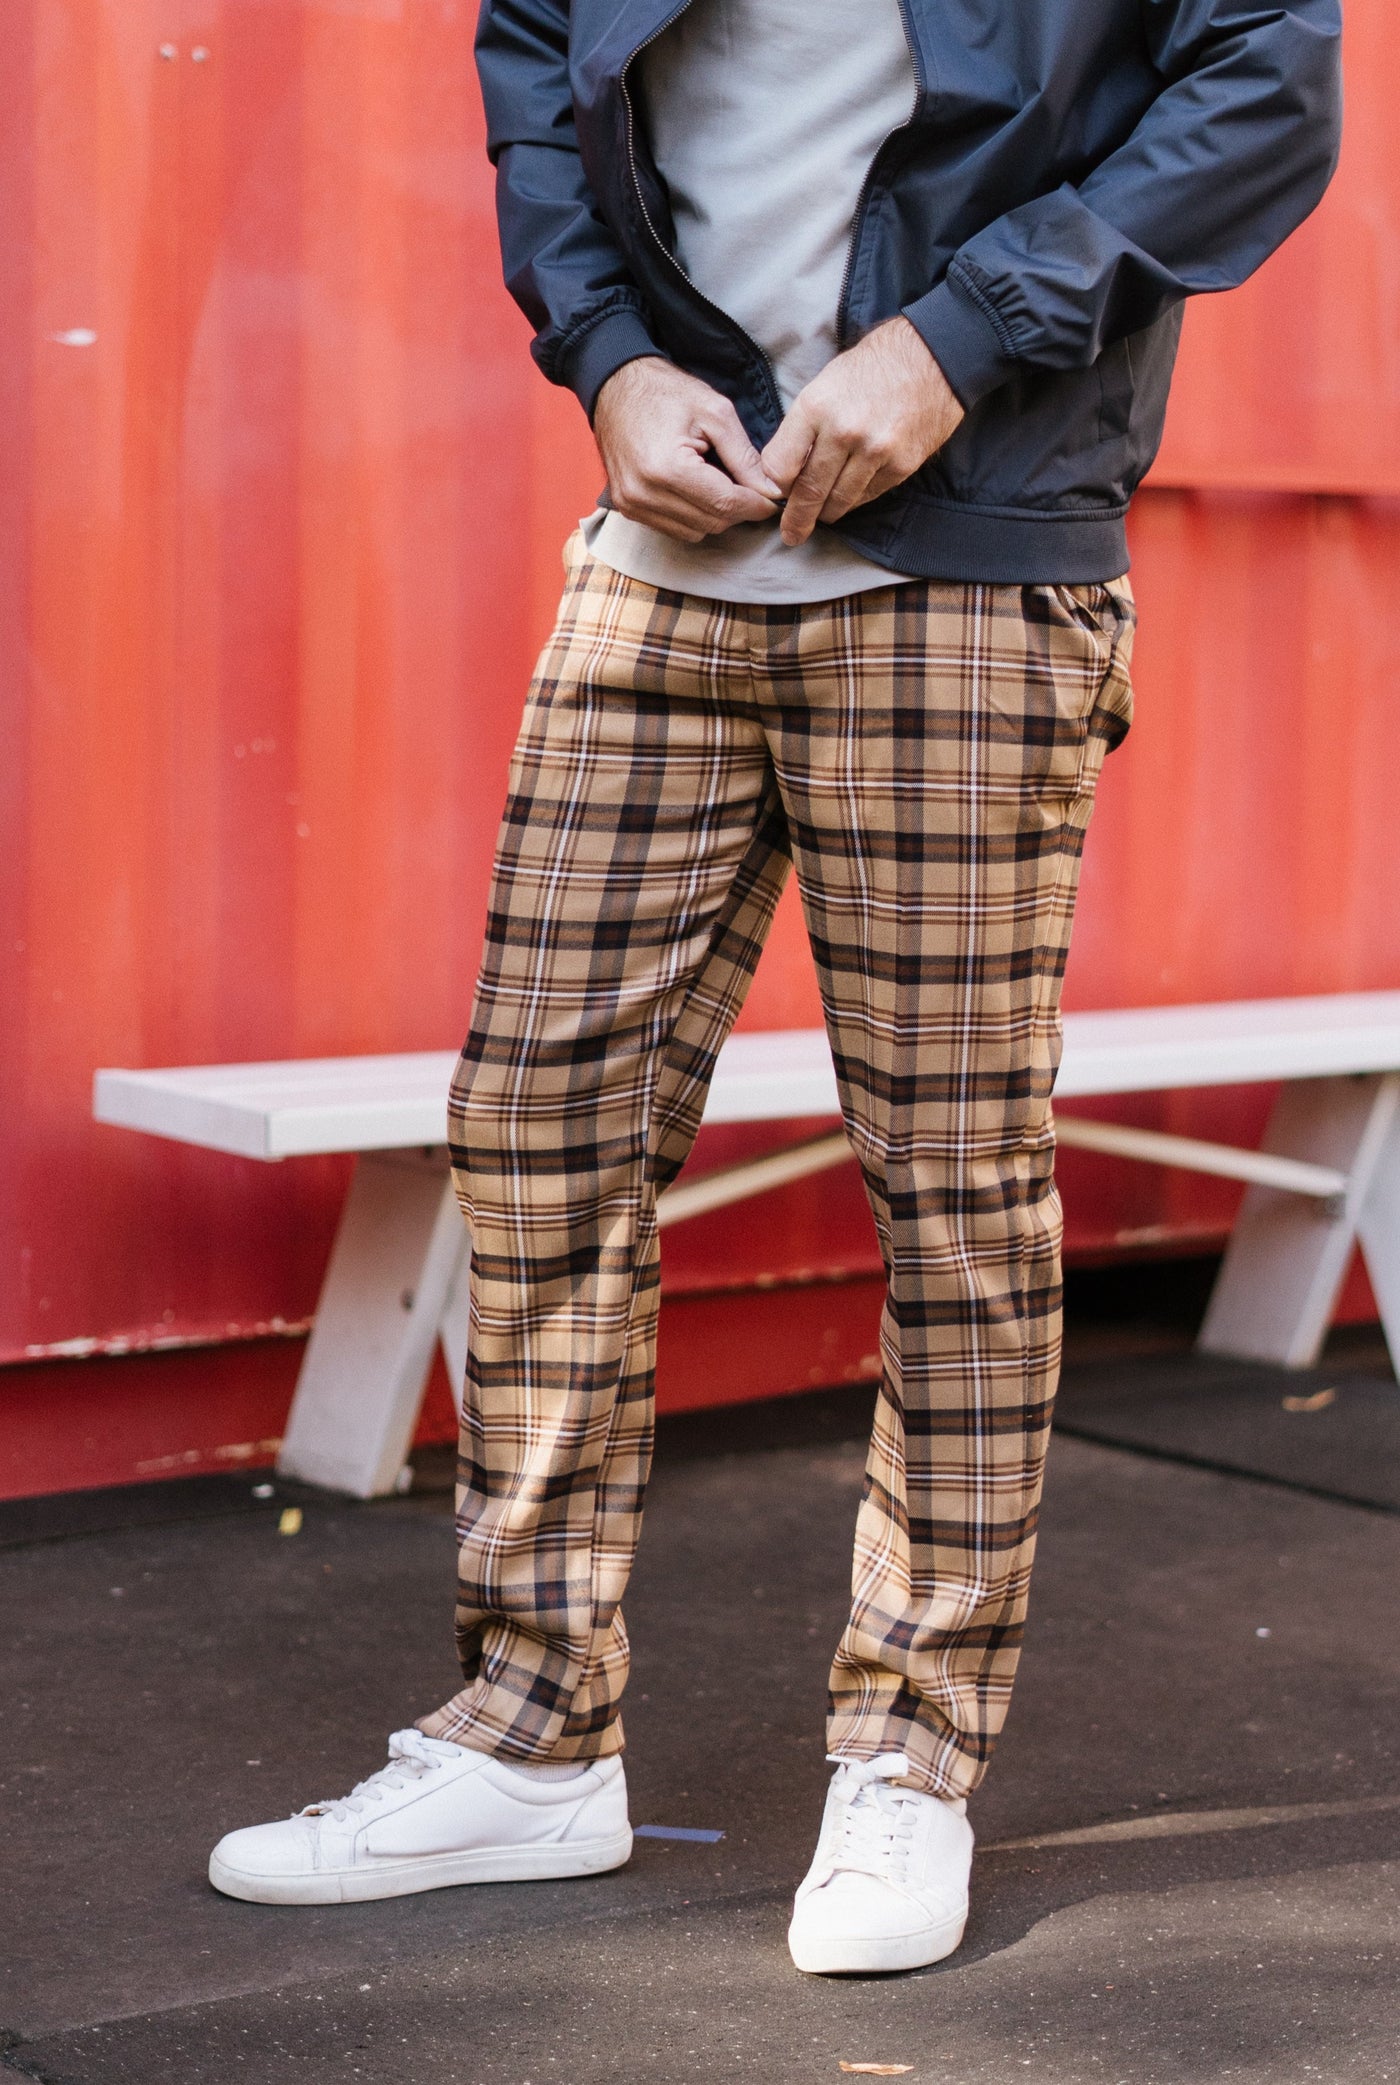 How to style plaid trousers - Quora